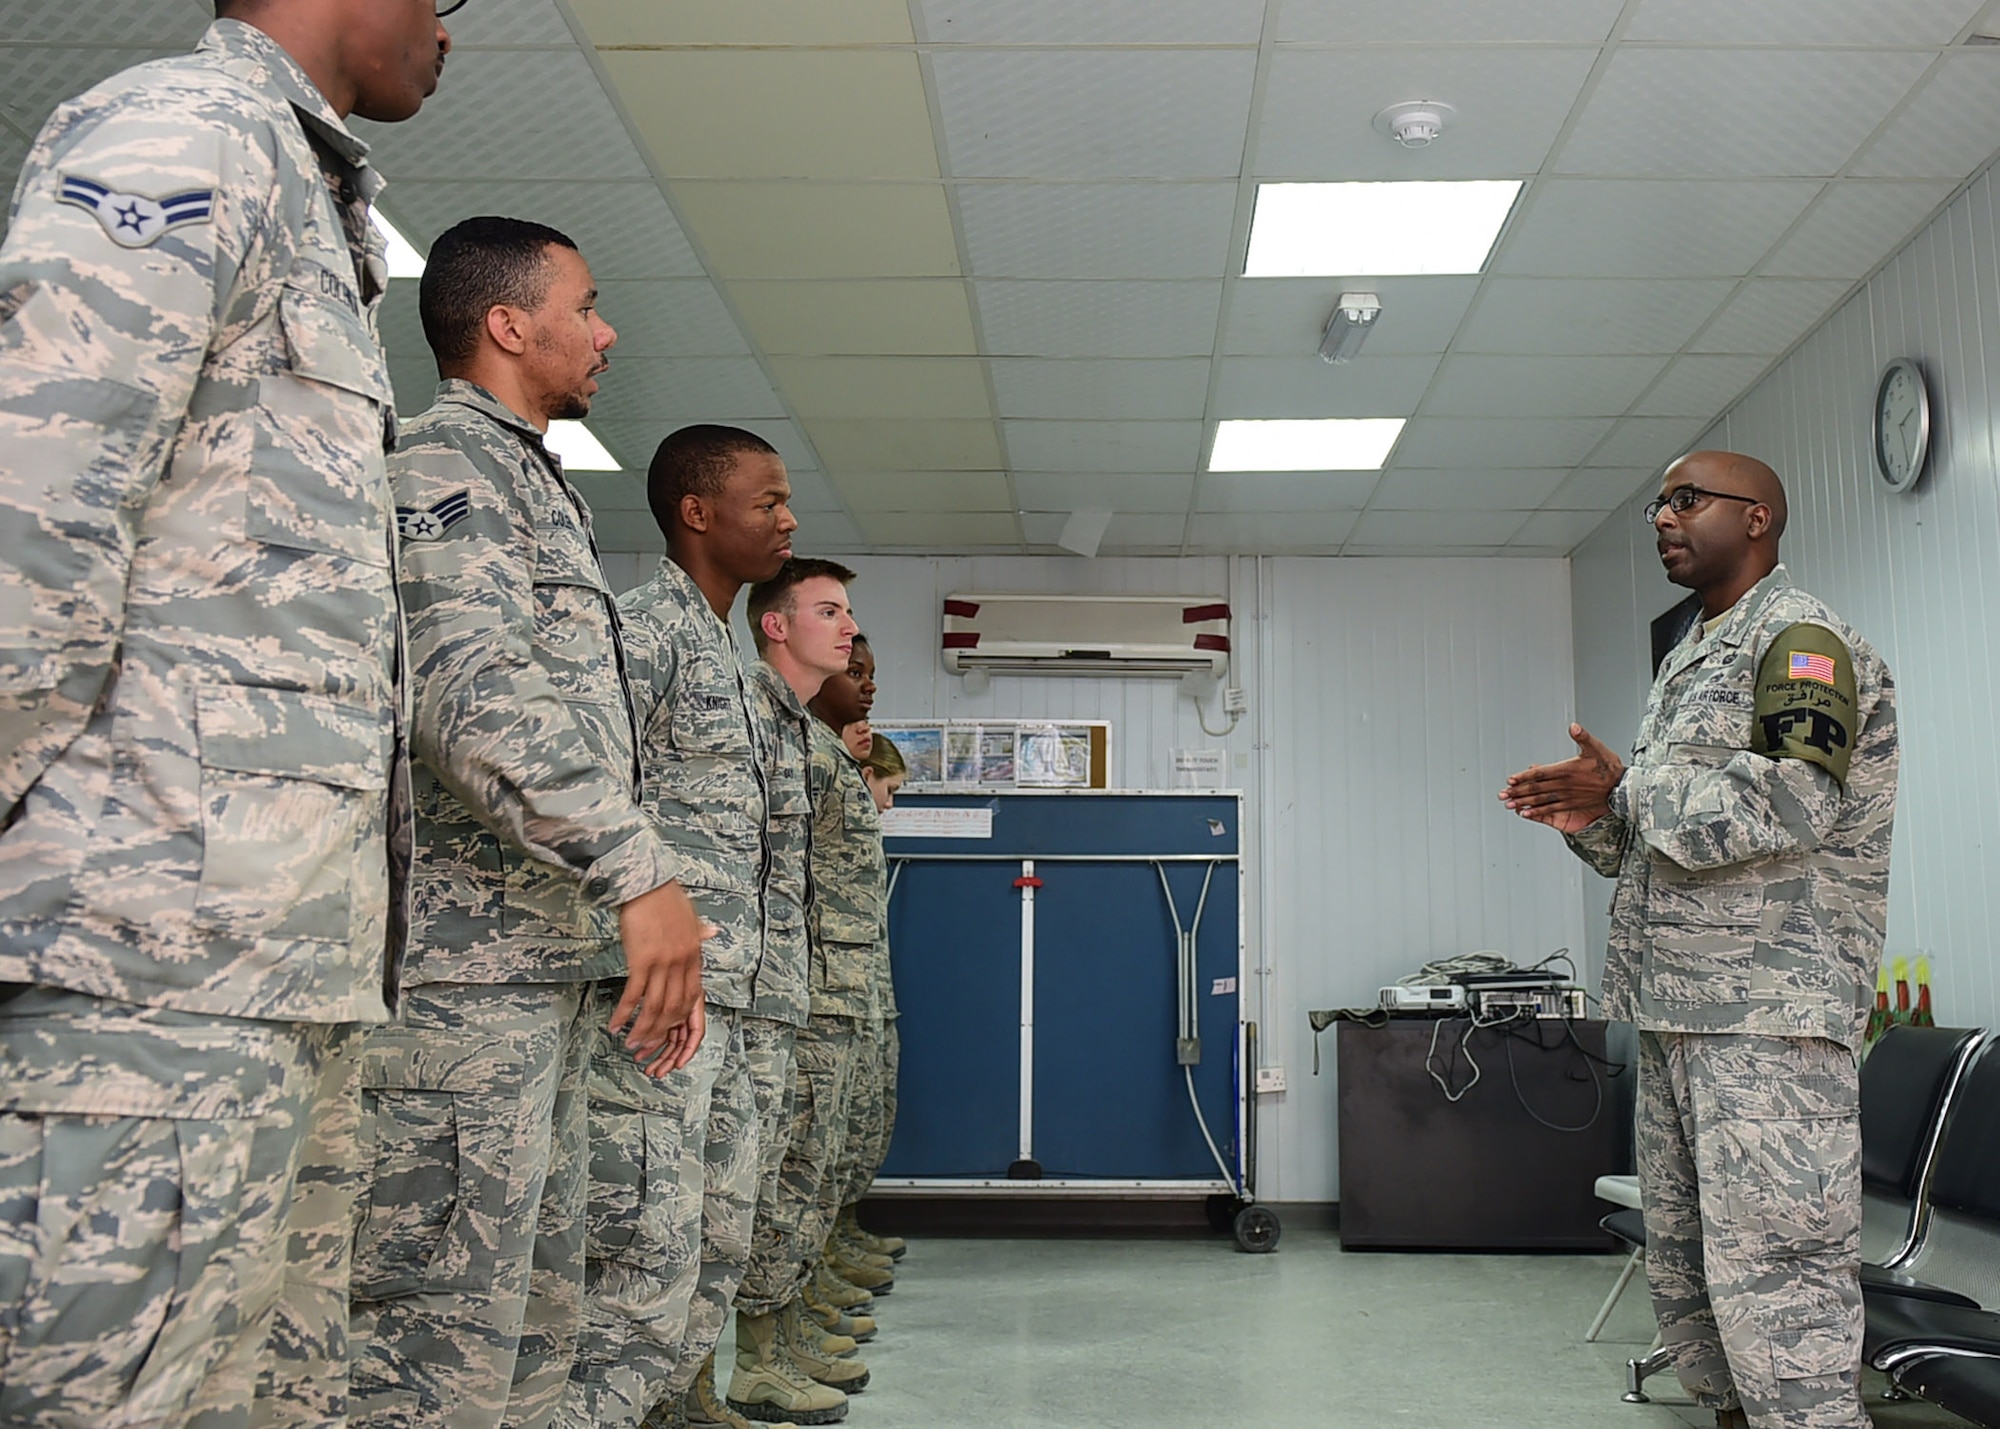 Tech. Sgt. Tyron Fields, a 386th Expeditionary Civil Engineer Squadron Force Protection shift lead, speaks to Airmen during roll call at an undisclosed location in Southwest Asia, Dec. 16, 2015. Fields co-founded a mentorship program aimed to help troubled youth in his hometown of Charleston, South Carolina. Fields is currently deployed to the 386th AEW in support of Operation INHERENT RESOVE. (U.S. Air Force photo by Staff Sgt. Jerilyn Quintanilla)